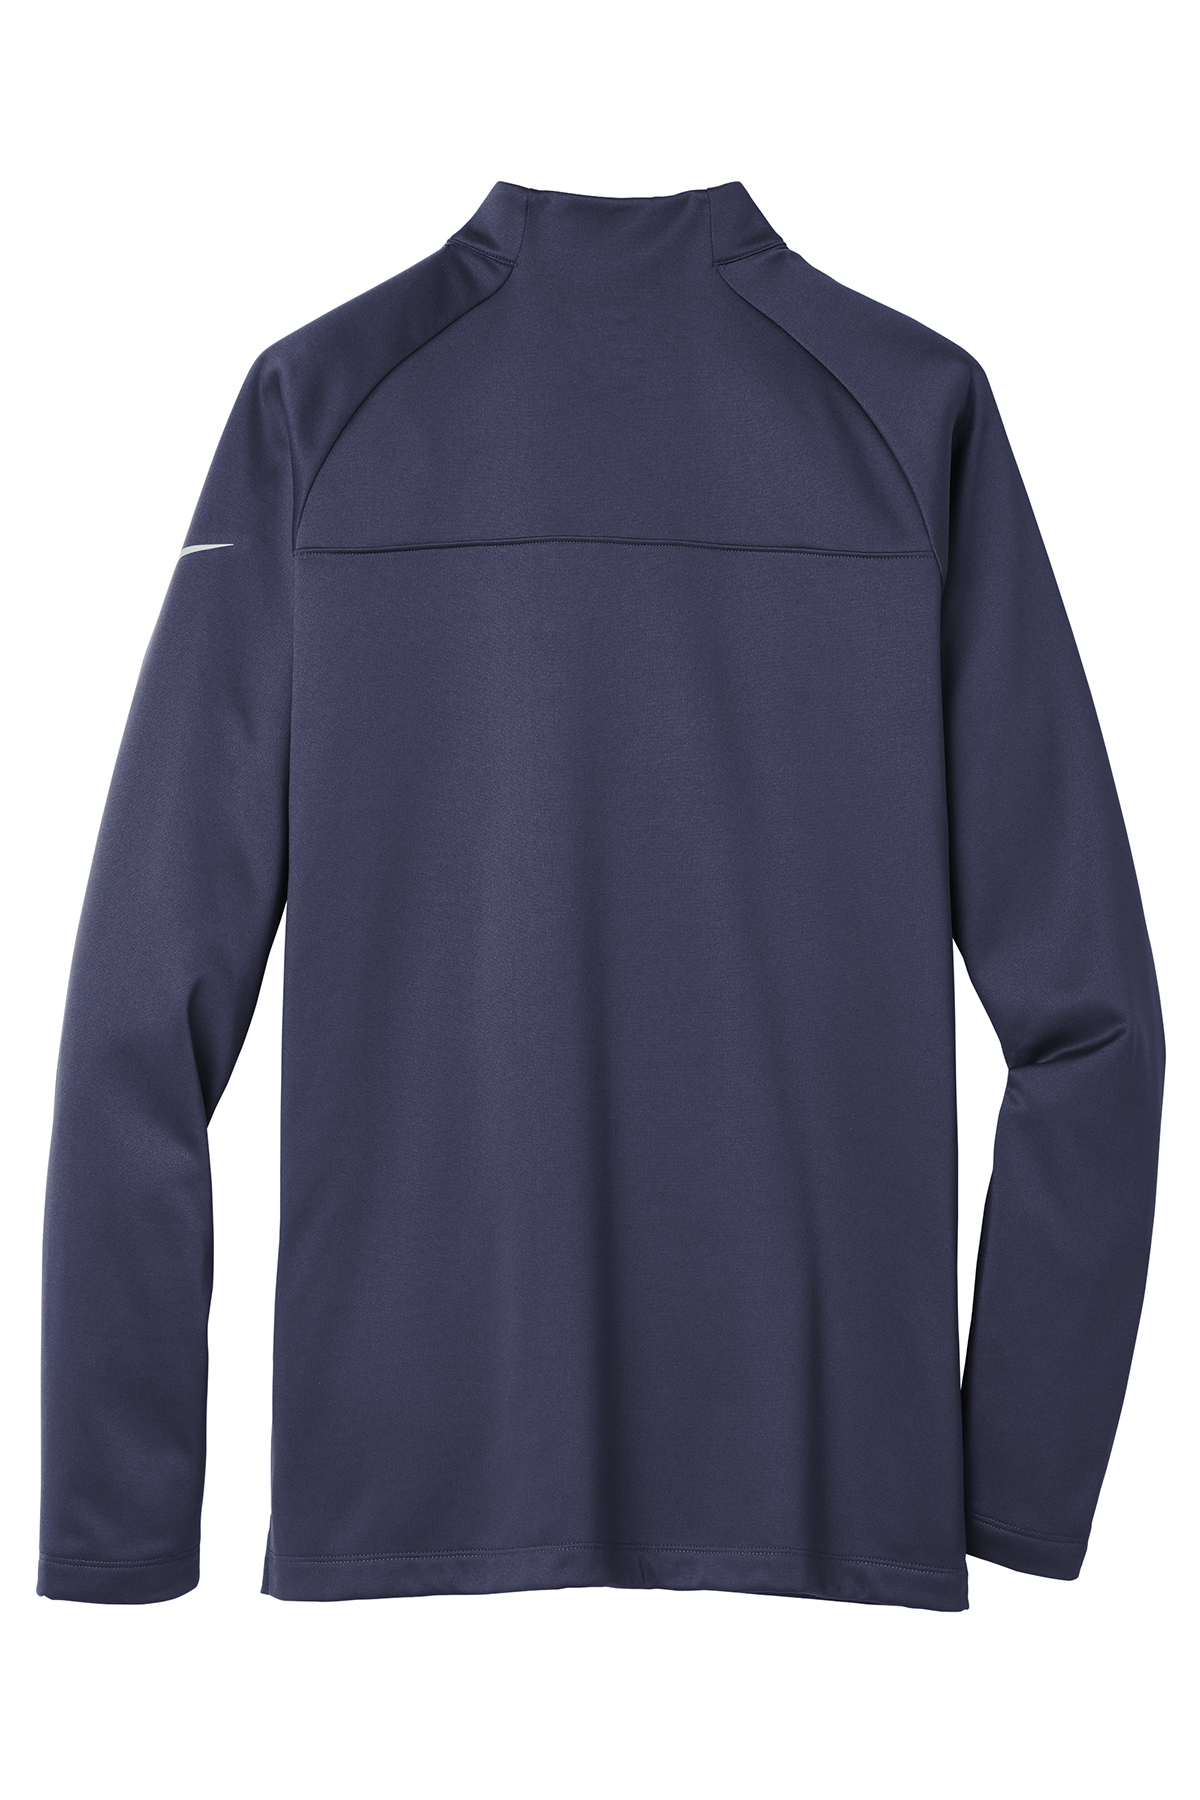 Nike Therma-FIT 1/2-Zip Fleece | Product | Company Casuals